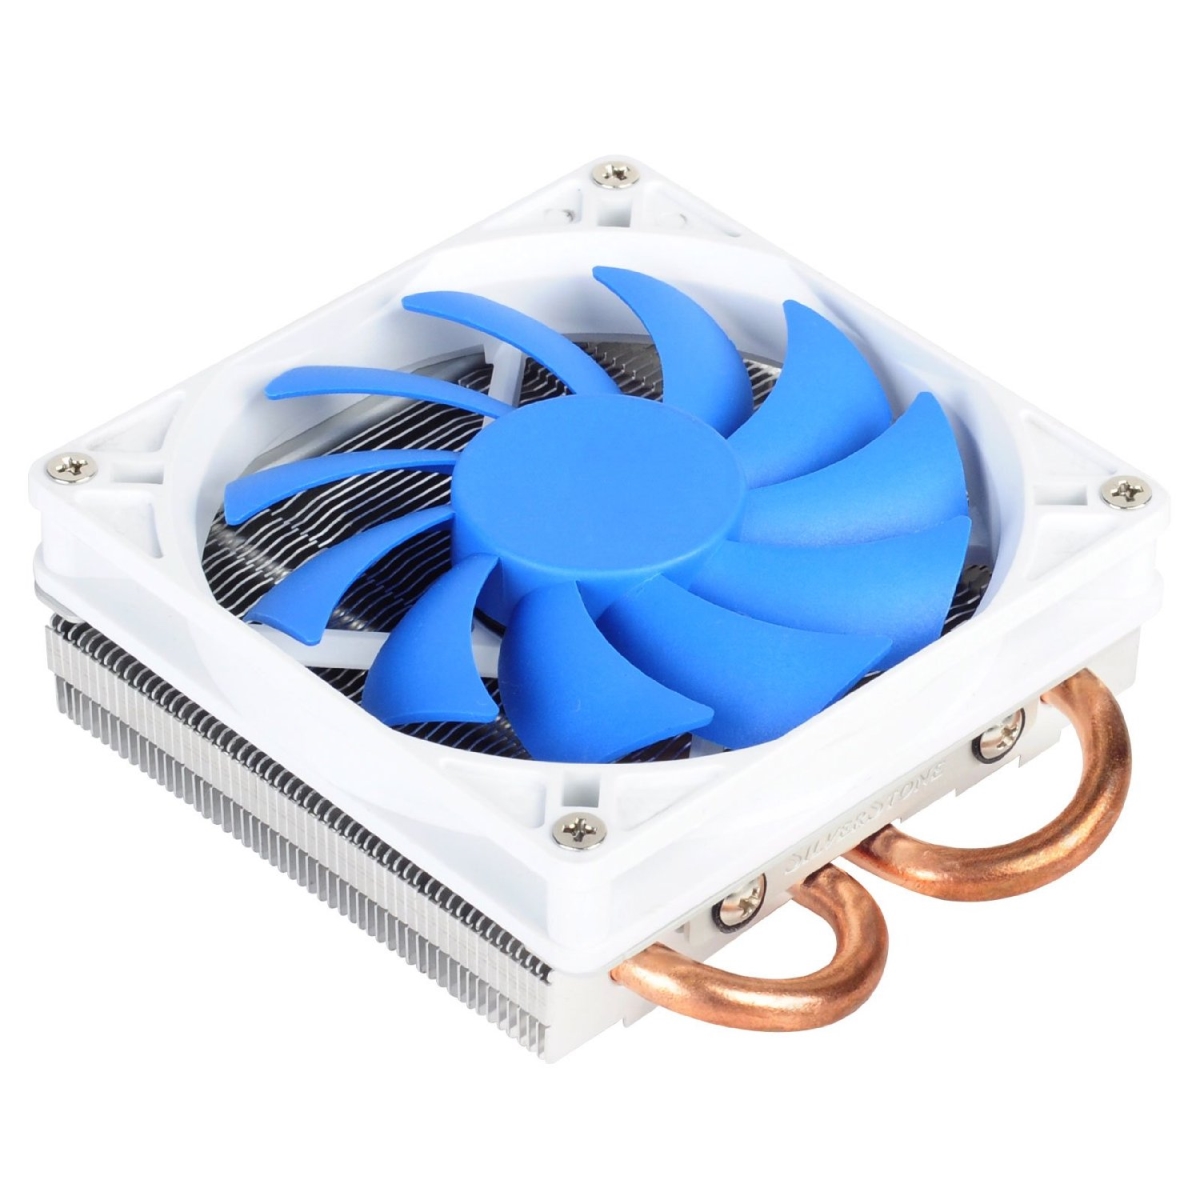 Picture of Silver Stone Technologies AR05 Heatsink CPU Cooler with 92 mm PWM Fan, Two 6 mm Heat Pipes